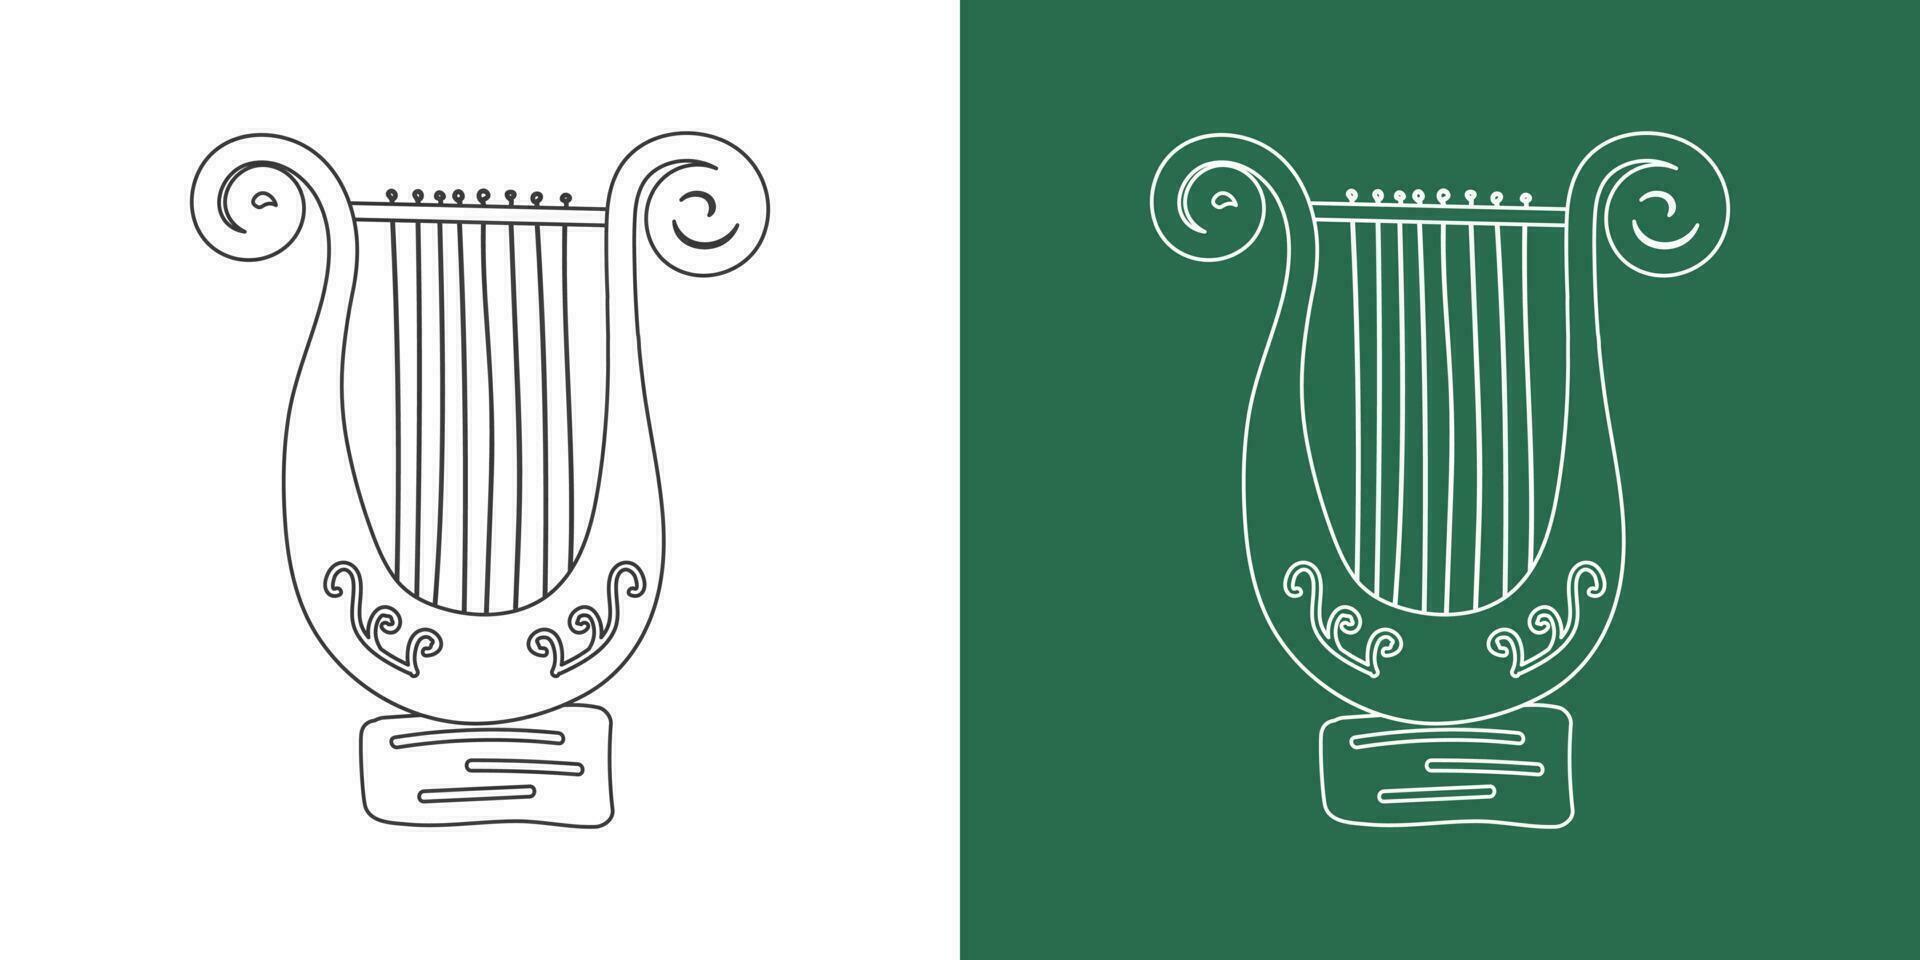 Lyre line drawing cartoon style. String instrument lyre clipart drawing in linear style isolated on white and chalkboard background. Musical instrument clipart concept, vector design